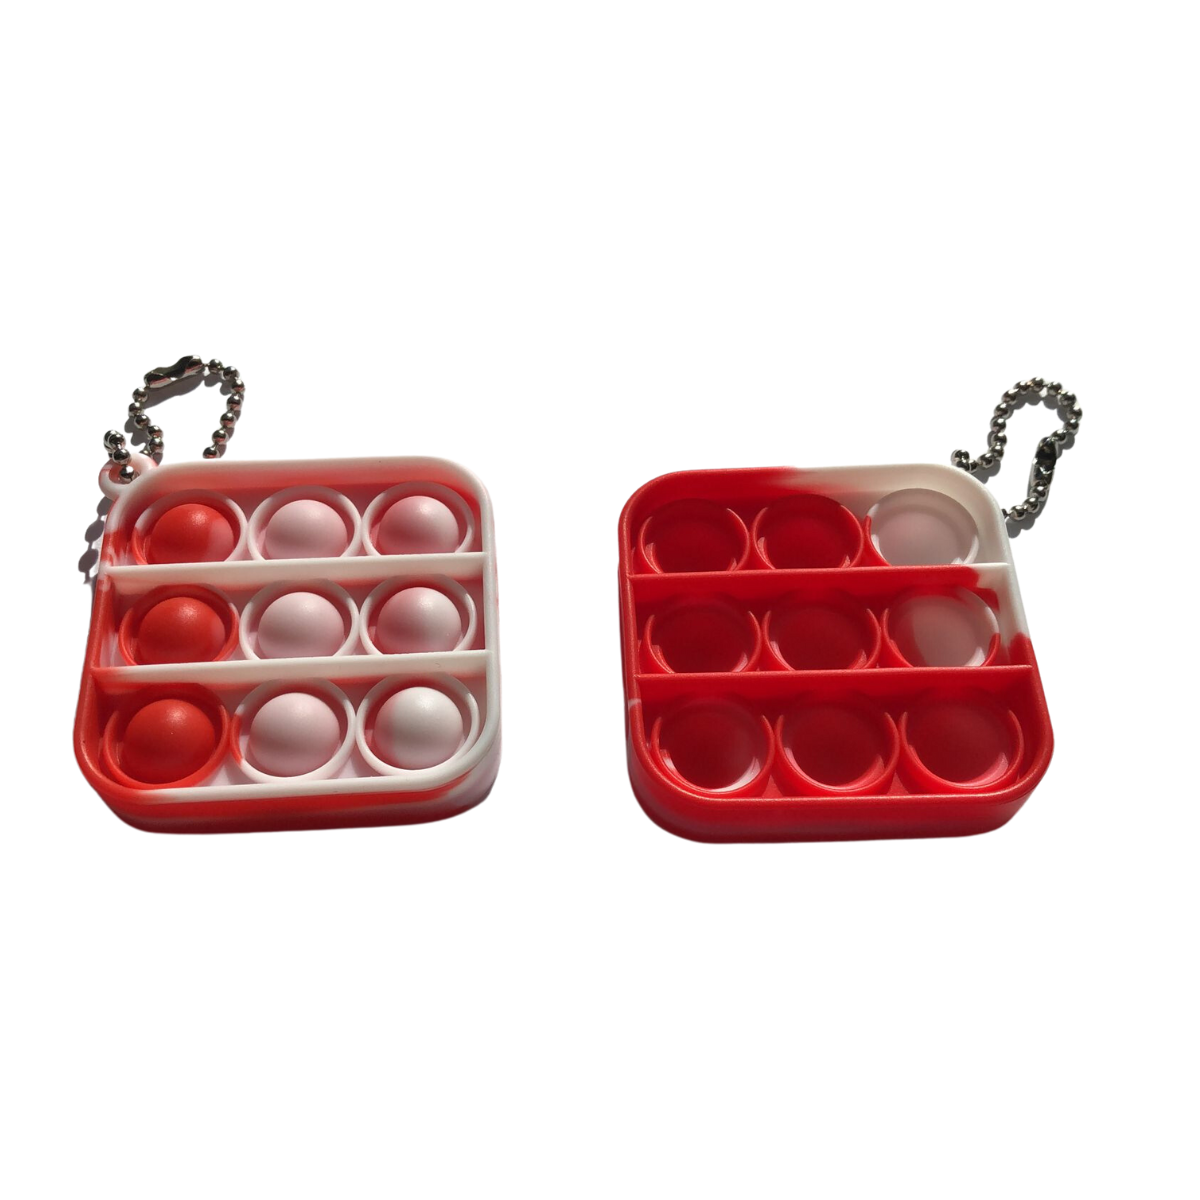 Key-Chain Squared Bubble Popper Red